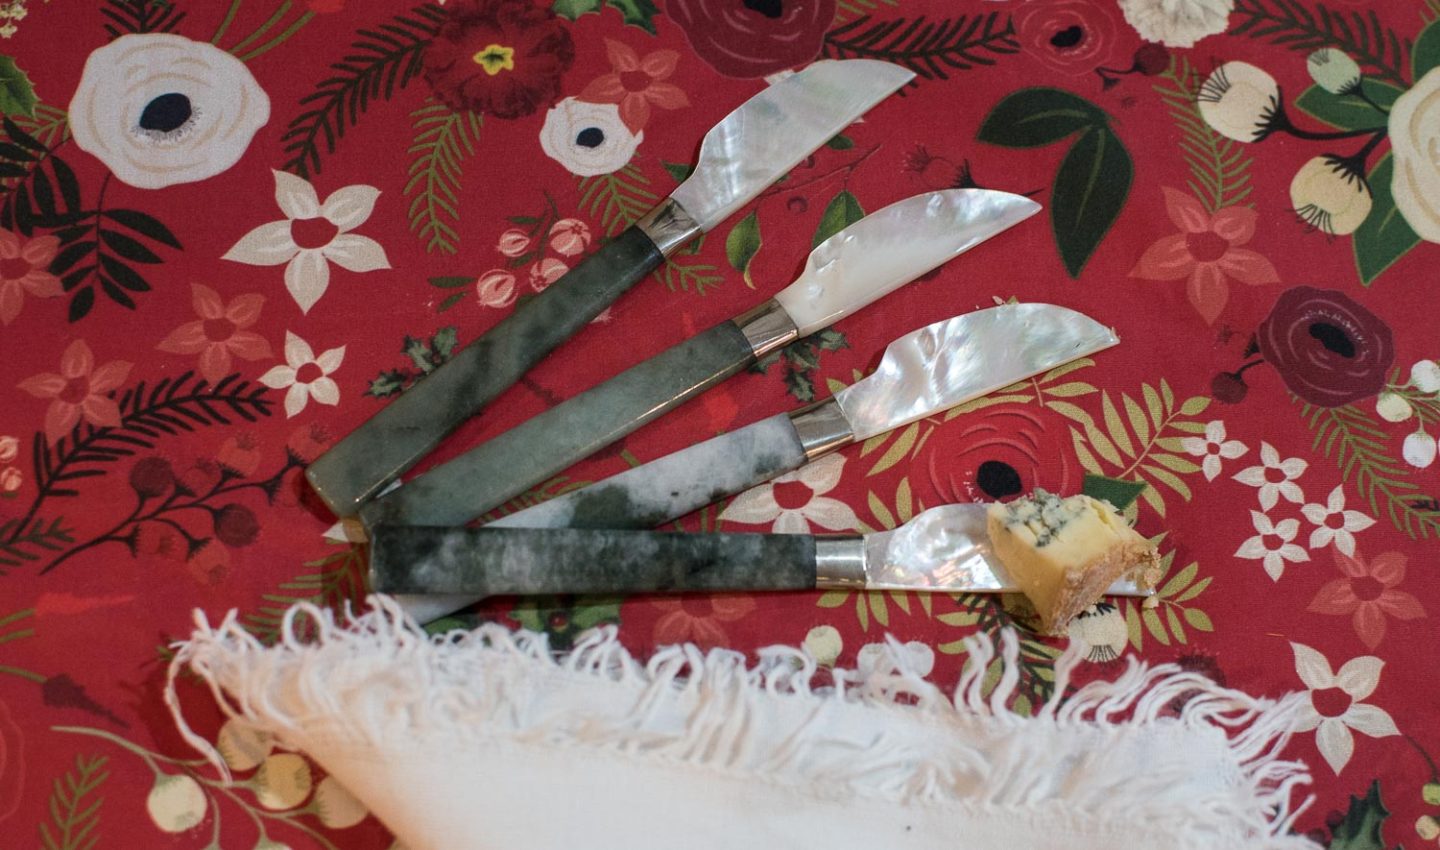 Artisan made butter knives from Kalinko on a table cloth made with fabric from Spoonflower